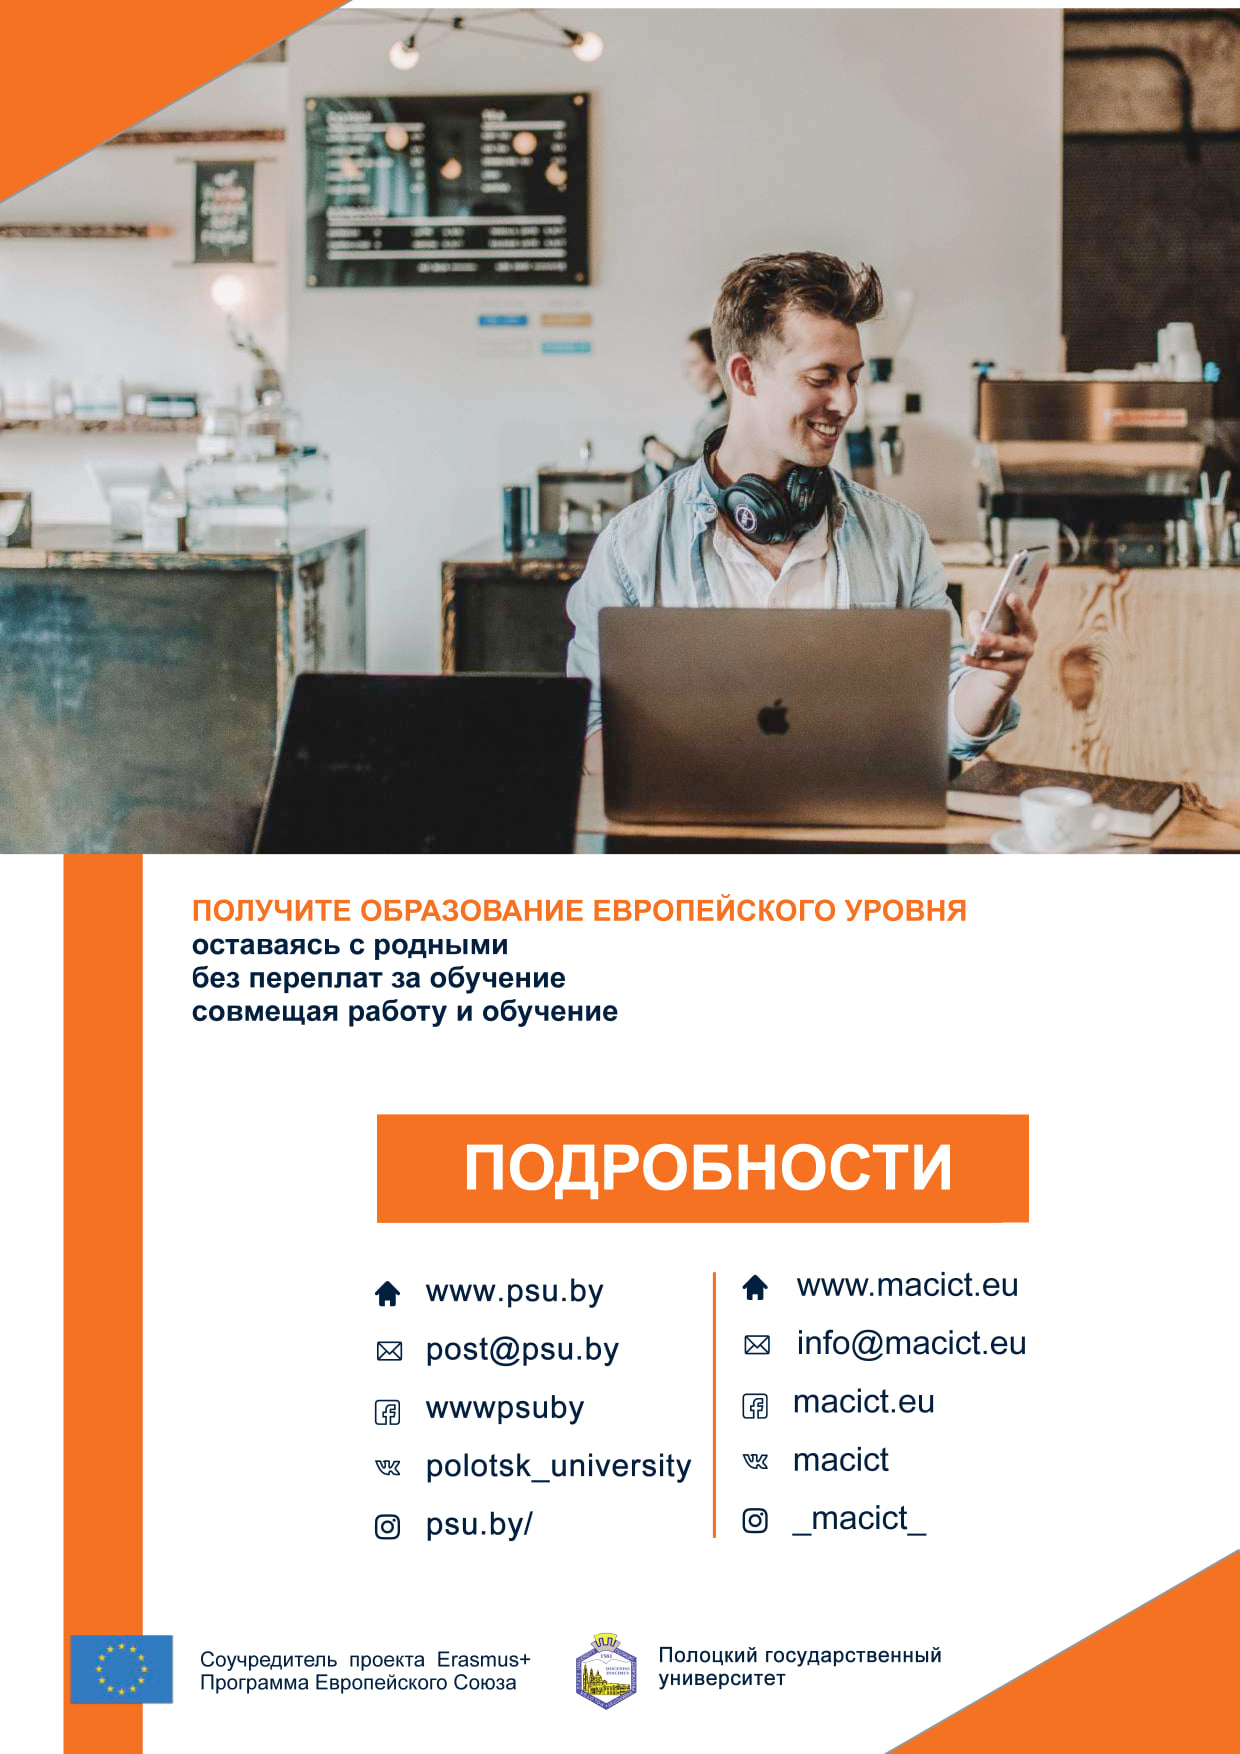 Are you still waiting for the colorful flyer about MACICT courses at Polotsk State University?